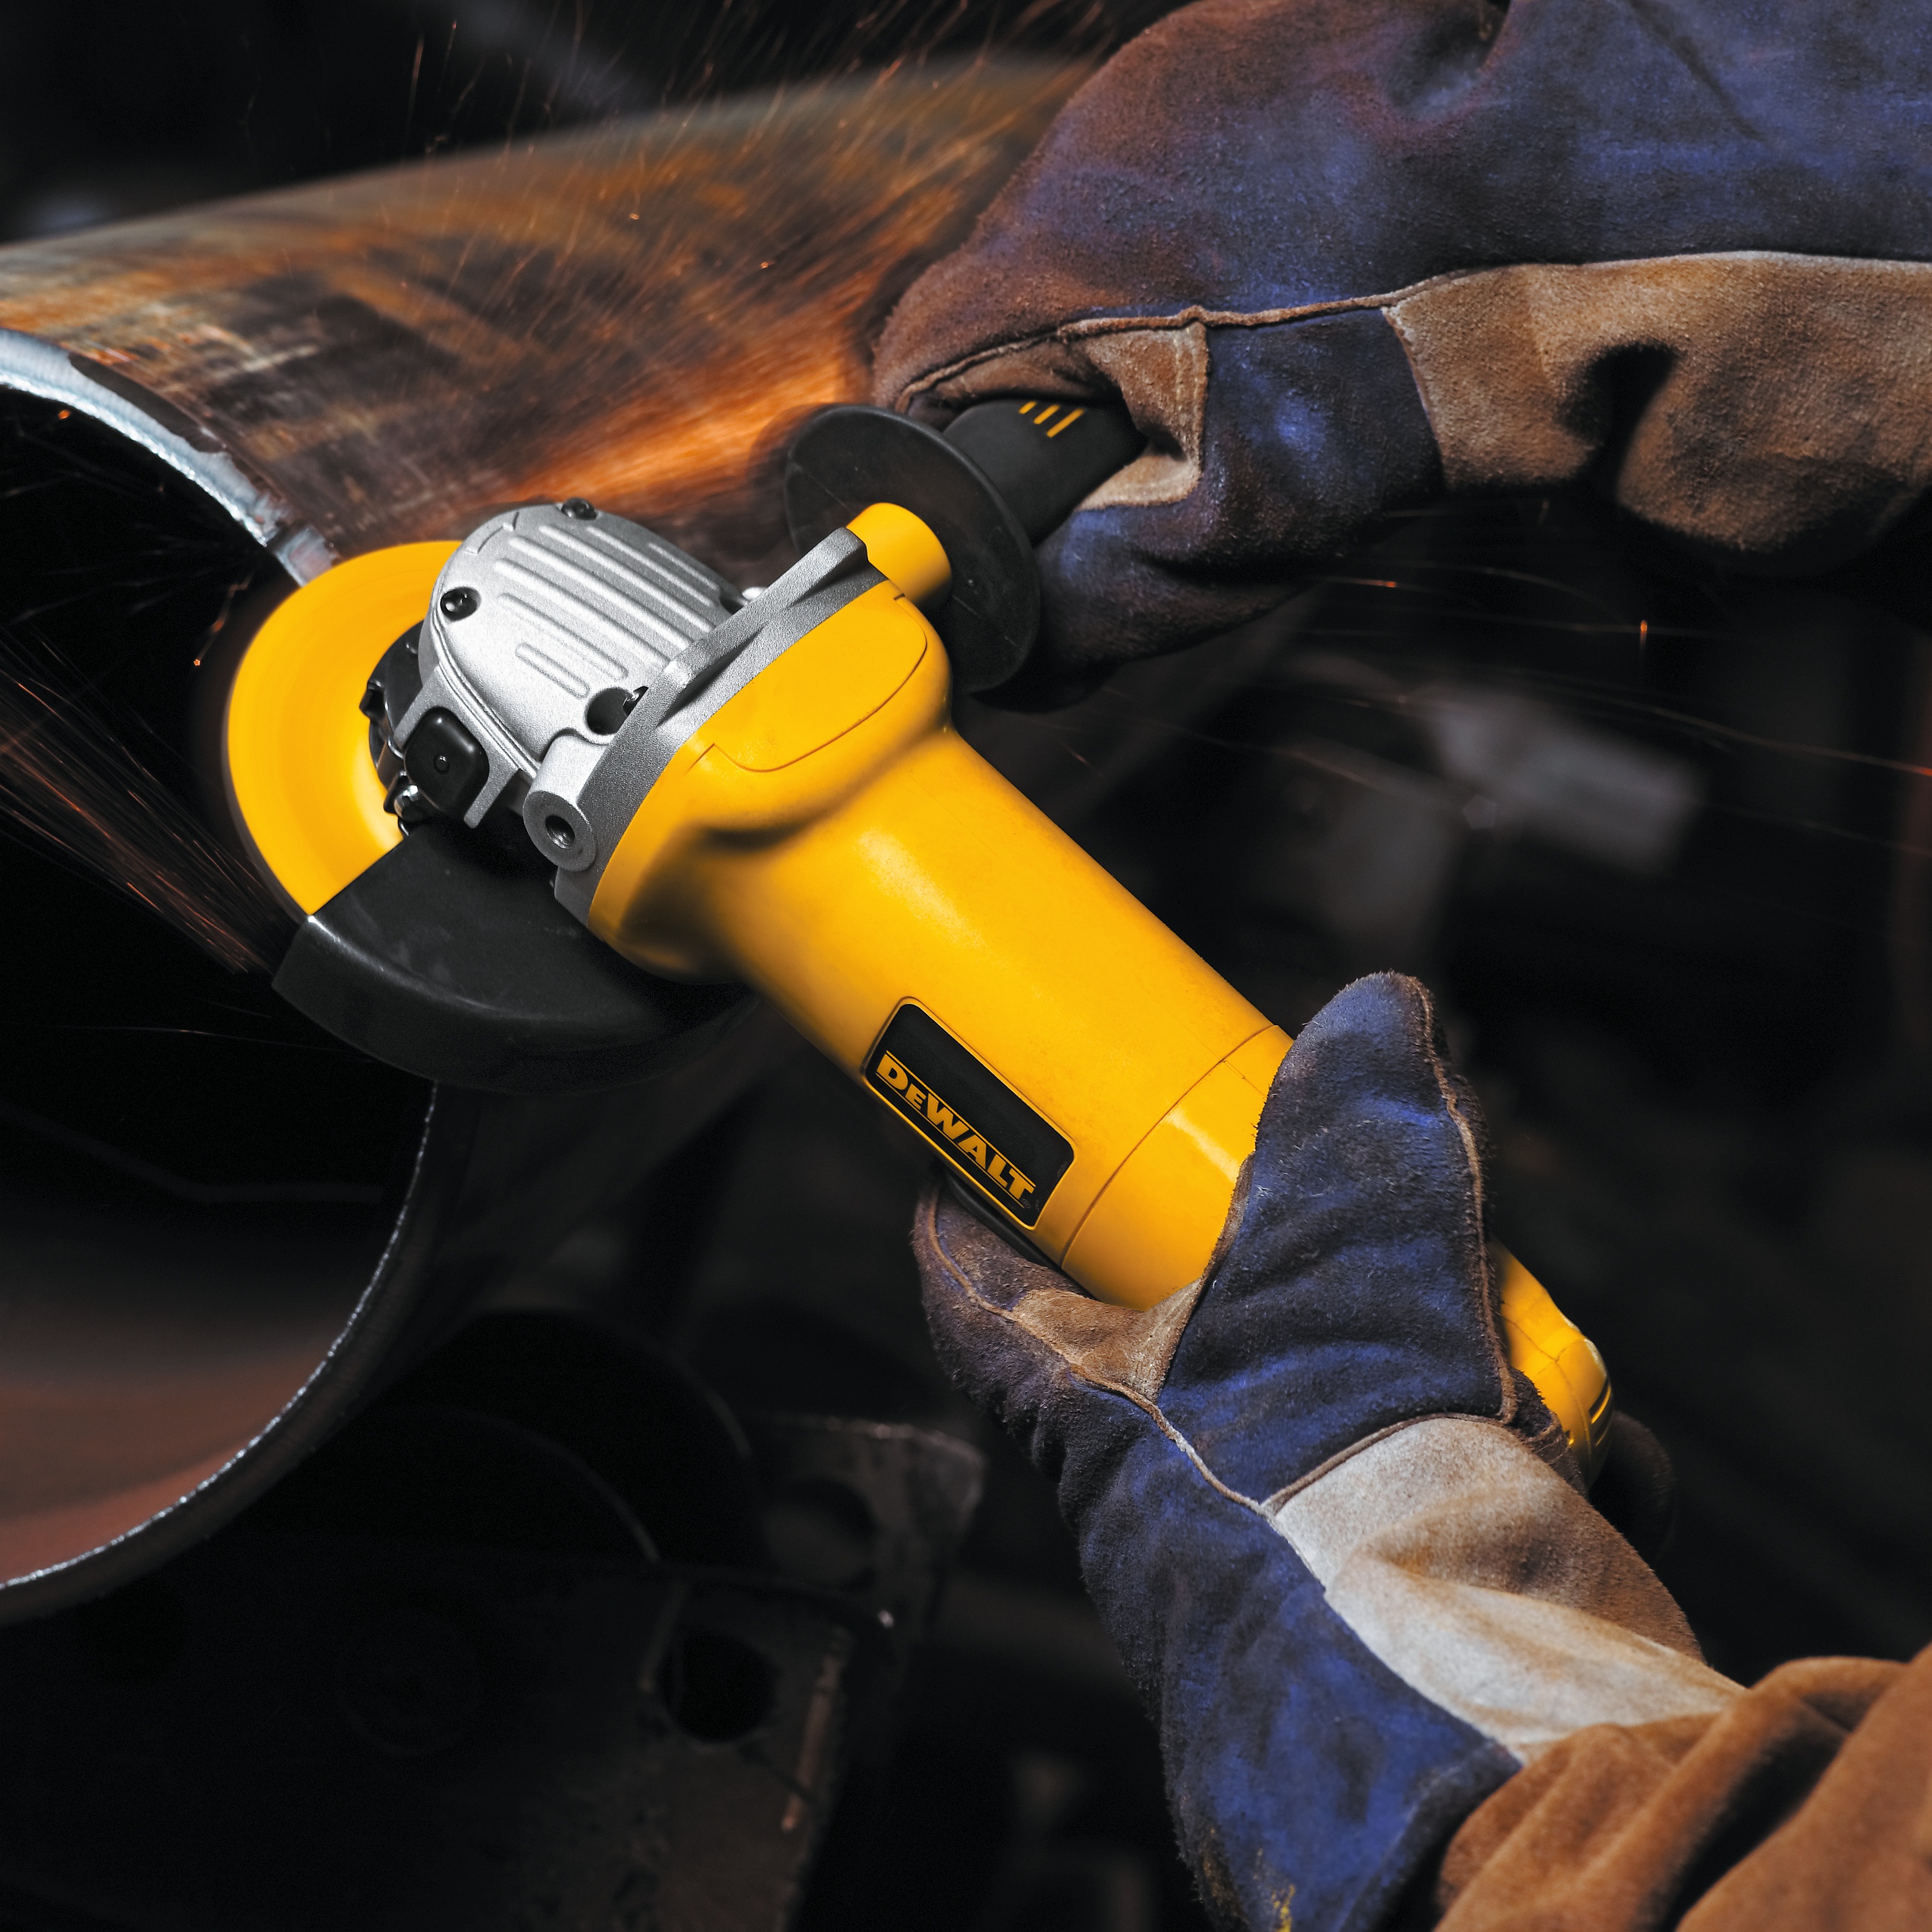 Small Angle Grinder being used on a metal piece